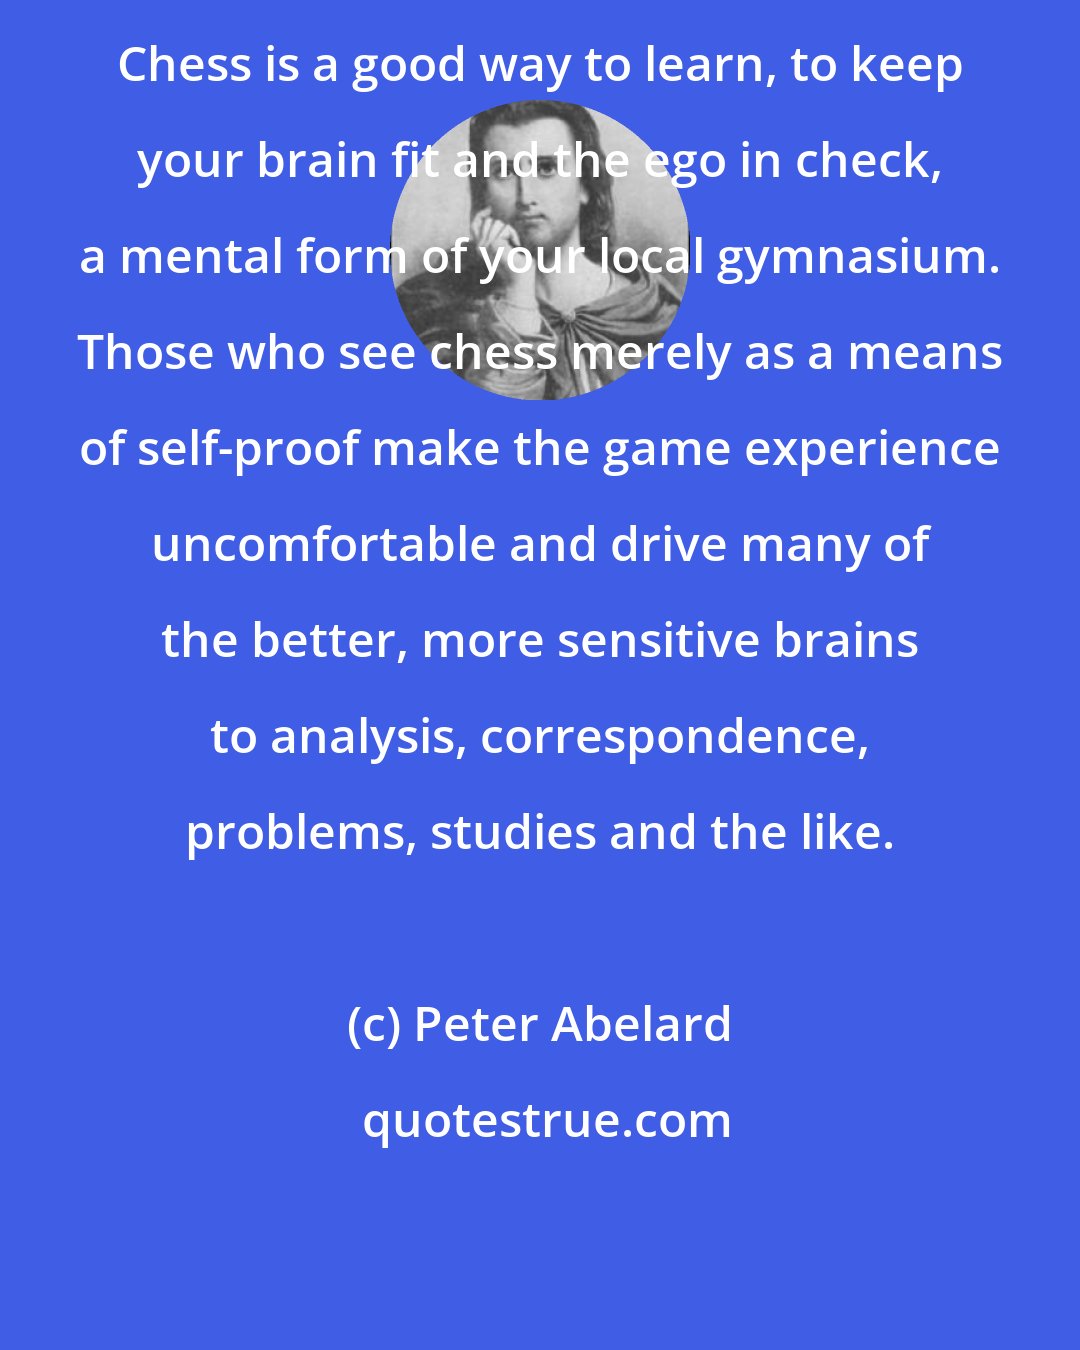 Peter Abelard: Chess is a good way to learn, to keep your brain fit and the ego in check, a mental form of your local gymnasium. Those who see chess merely as a means of self-proof make the game experience uncomfortable and drive many of the better, more sensitive brains to analysis, correspondence, problems, studies and the like.